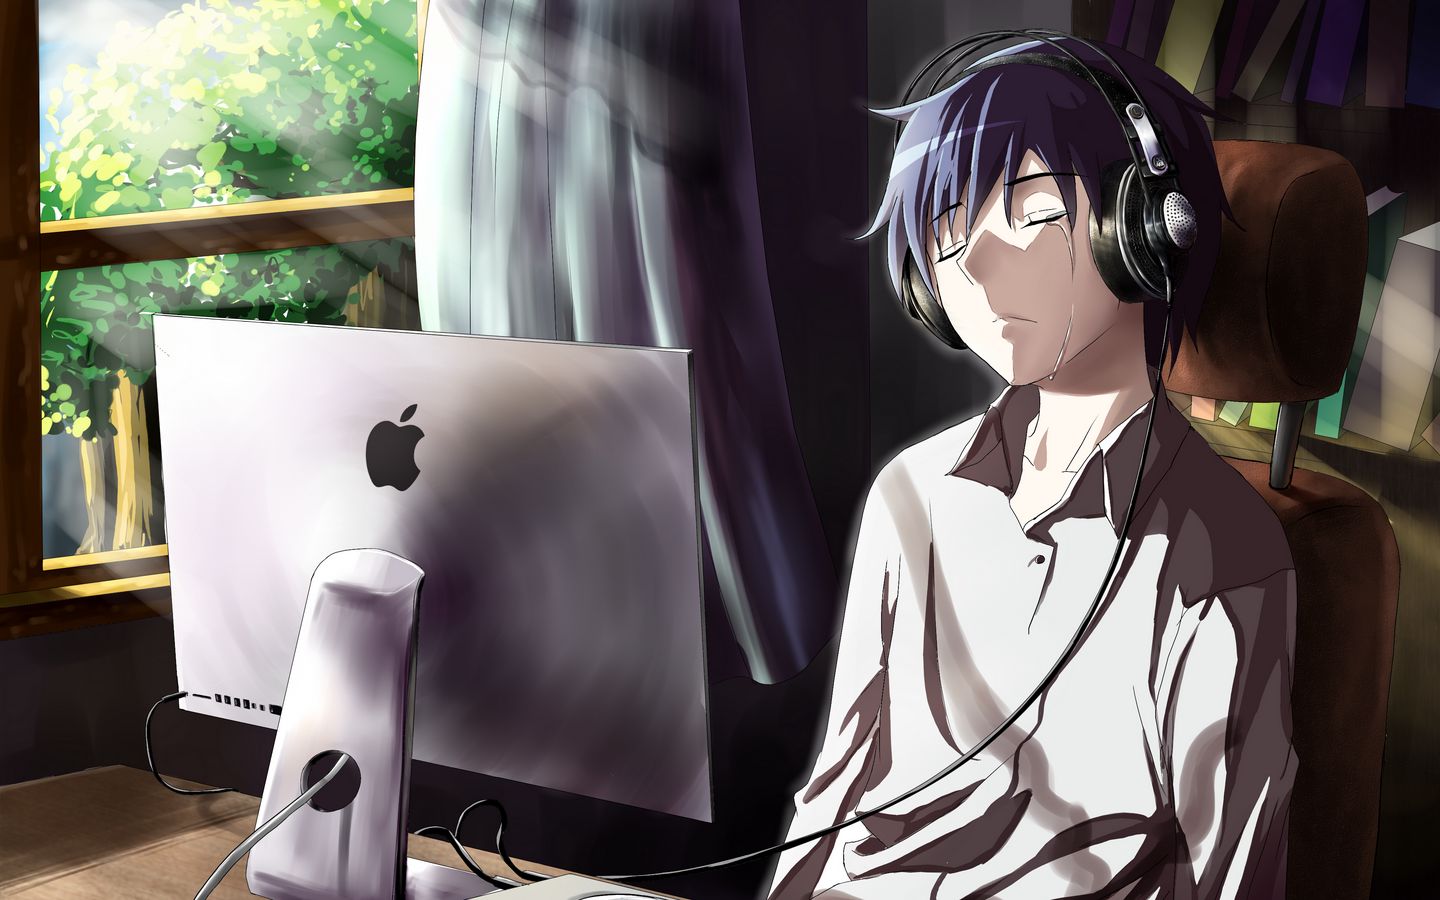 Download wallpaper 1440x900 guy, anime, computer, tears, sadness, room  widescreen 16:10 hd background